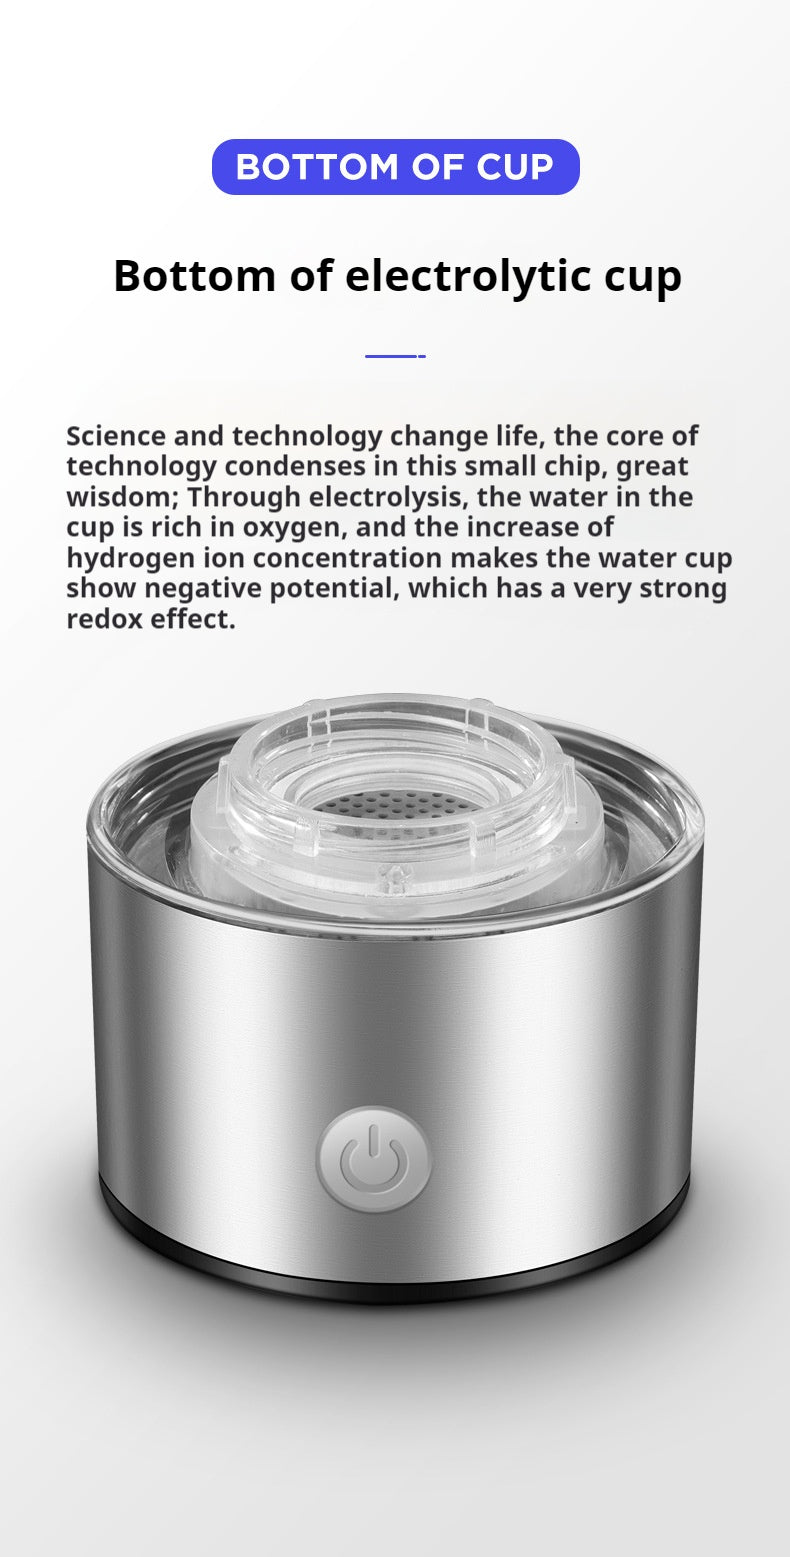 Hydrogen-rich Water Cup with Smart Electrolysis can Absorb Hydrogen